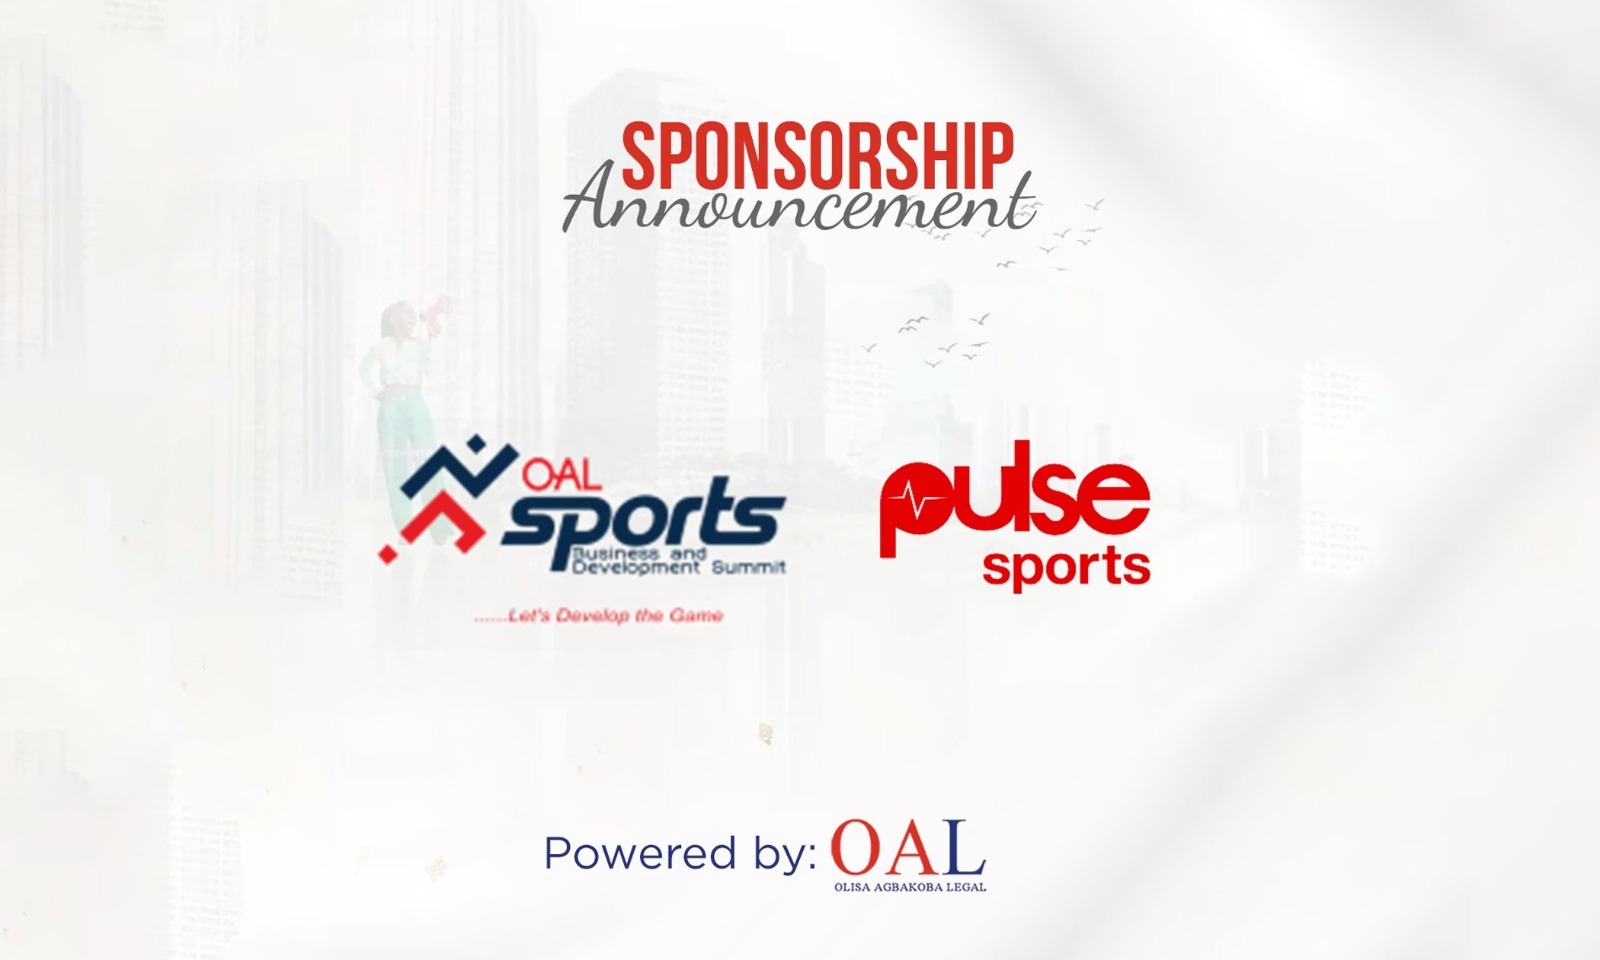 OAL partnership with Pulse Sports Nigeria